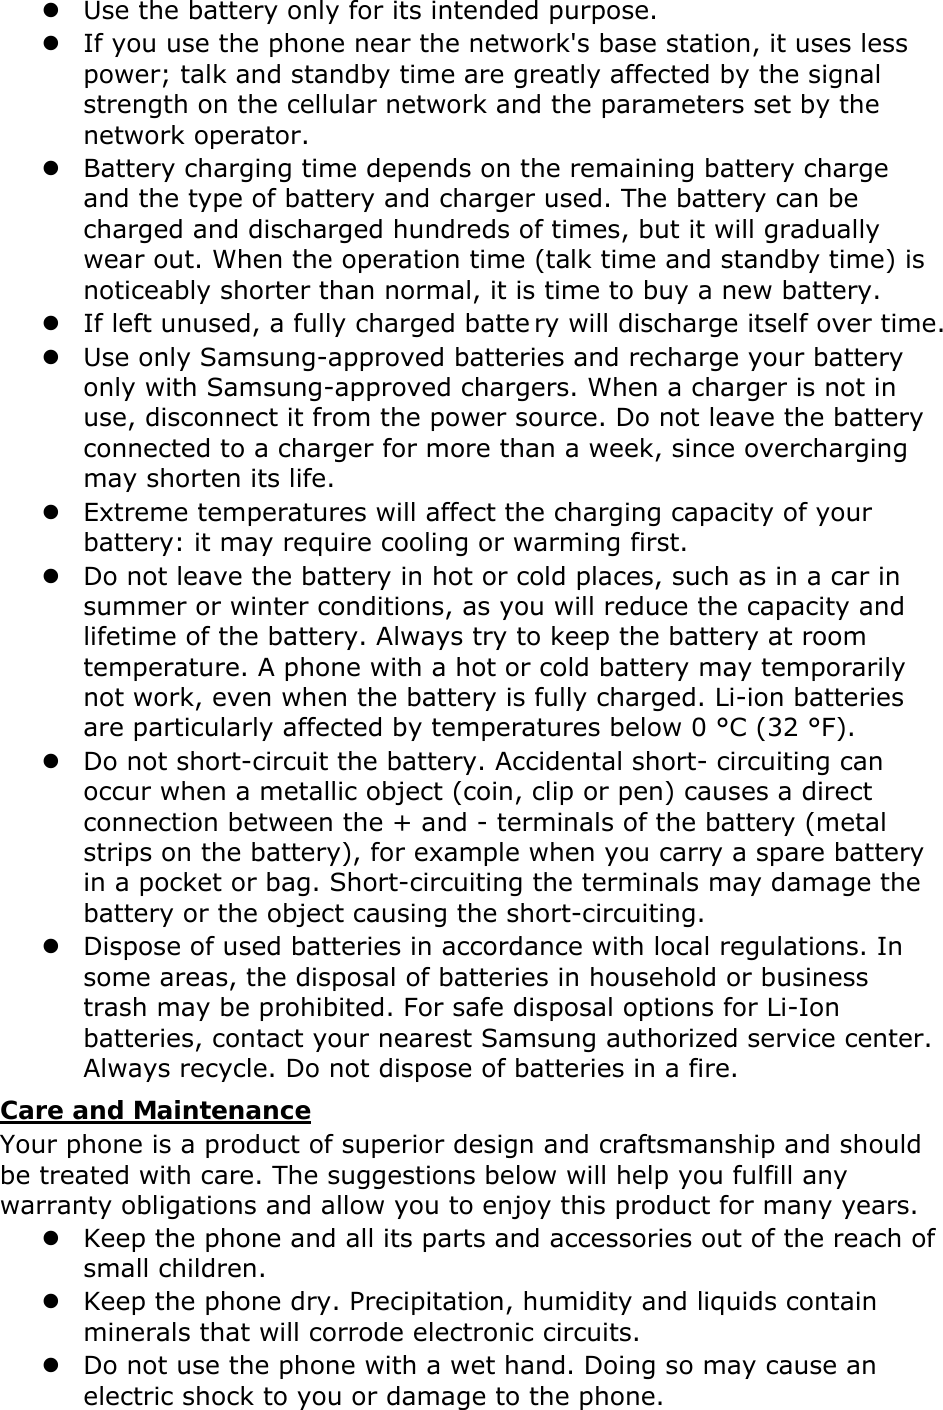  Use the battery only for its intended purpose.  If you use the phone near the network&apos;s base station, it uses less power; talk and standby time are greatly affected by the signal strength on the cellular network and the parameters set by the network operator.  Battery charging time depends on the remaining battery charge and the type of battery and charger used. The battery can be charged and discharged hundreds of times, but it will gradually wear out. When the operation time (talk time and standby time) is noticeably shorter than normal, it is time to buy a new battery.  If left unused, a fully charged batte ry will discharge itself over time.   Use only Samsung-approved batteries and recharge your battery only with Samsung-approved chargers. When a charger is not in use, disconnect it from the power source. Do not leave the battery connected to a charger for more than a week, since overcharging may shorten its life.  Extreme temperatures will affect the charging capacity of your battery: it may require cooling or warming first.  Do not leave the battery in hot or cold places, such as in a car in summer or winter conditions, as you will reduce the capacity and lifetime of the battery. Always try to keep the battery at room temperature. A phone with a hot or cold battery may temporarily not work, even when the battery is fully charged. Li-ion batteries are particularly affected by temperatures below 0 °C (32 °F).  Do not short-circuit the battery. Accidental short- circuiting can occur when a metallic object (coin, clip or pen) causes a direct connection between the + and - terminals of the battery (metal strips on the battery), for example when you carry a spare battery in a pocket or bag. Short-circuiting the terminals may damage the battery or the object causing the short-circuiting.  Dispose of used batteries in accordance with local regulations. In some areas, the disposal of batteries in household or business trash may be prohibited. For safe disposal options for Li-Ion batteries, contact your nearest Samsung authorized service center. Always recycle. Do not dispose of batteries in a fire. Care and Maintenance Your phone is a product of superior design and craftsmanship and should be treated with care. The suggestions below will help you fulfill any warranty obligations and allow you to enjoy this product for many years.  Keep the phone and all its parts and accessories out of the reach of small children.  Keep the phone dry. Precipitation, humidity and liquids contain minerals that will corrode electronic circuits.  Do not use the phone with a wet hand. Doing so may cause an electric shock to you or damage to the phone. 